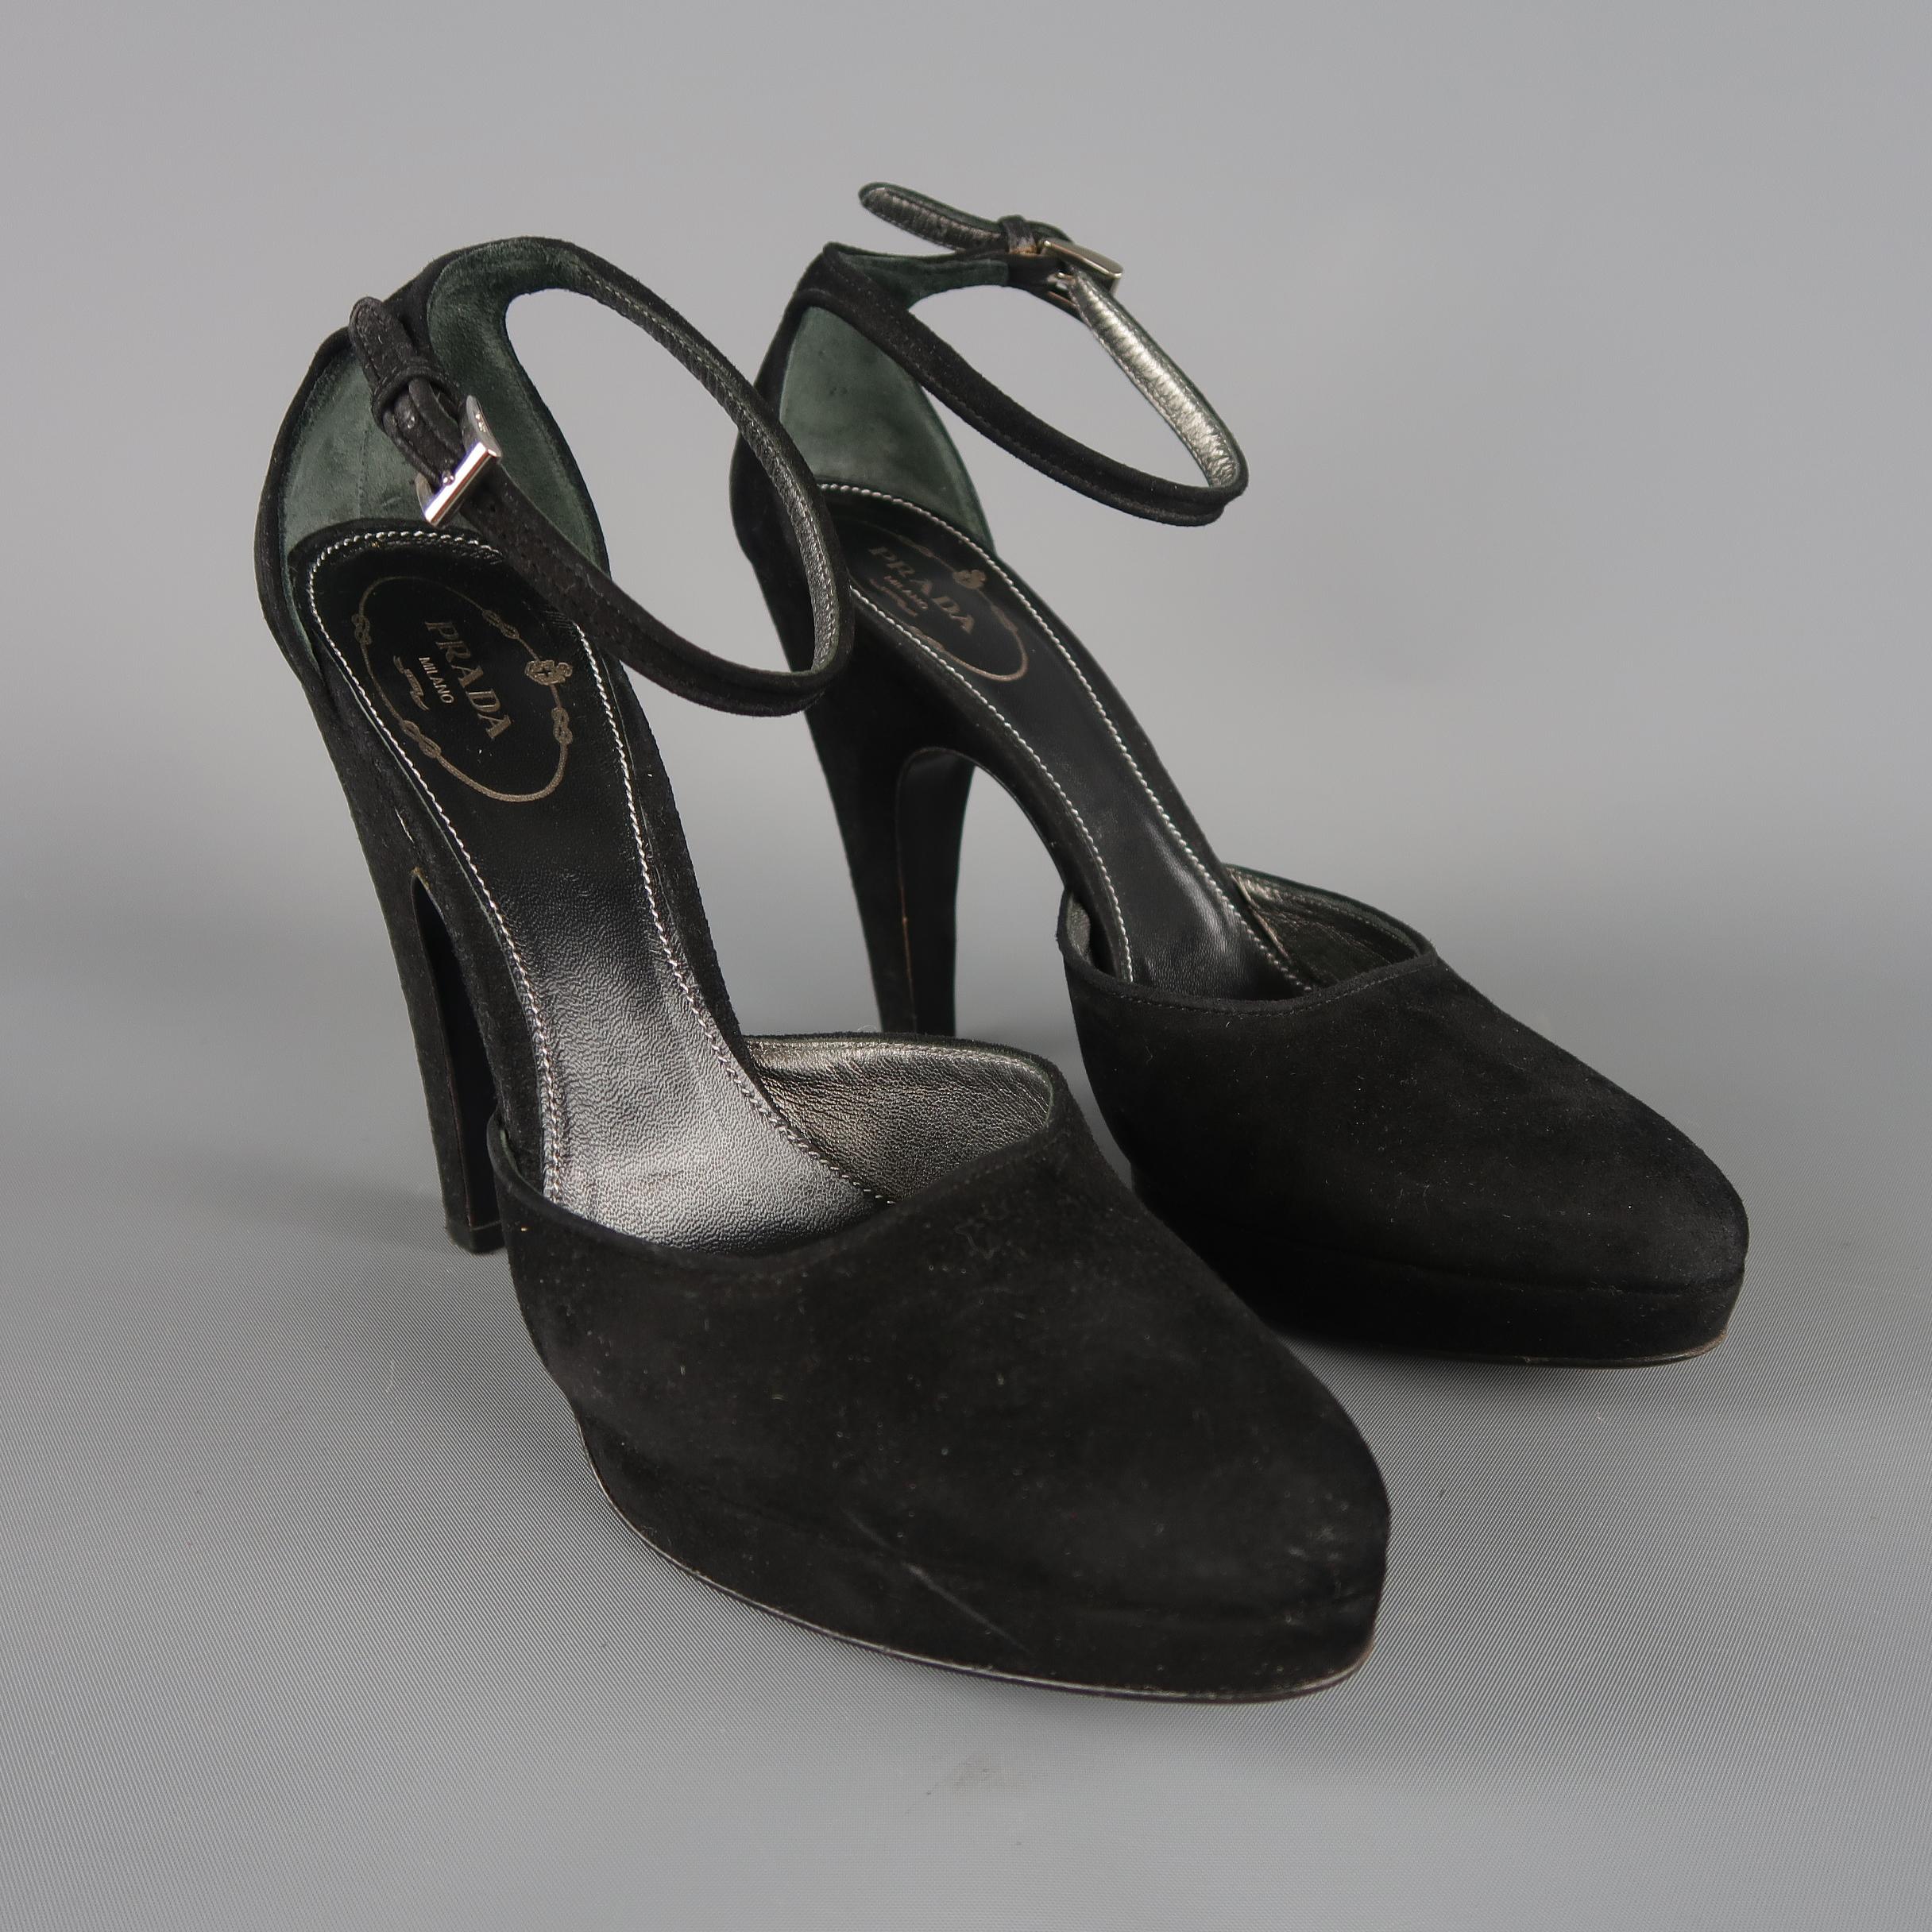 PRADA pumps come in black suede with a pointed toe, covered platform, ankle strap, and covered retro heel. Made in Italy.
 
Good Pre-Owned Condition.
Marked: IT 37.5
 
Measurements:
 
Heel: 4.5 in.
Platform: 0.5 in.